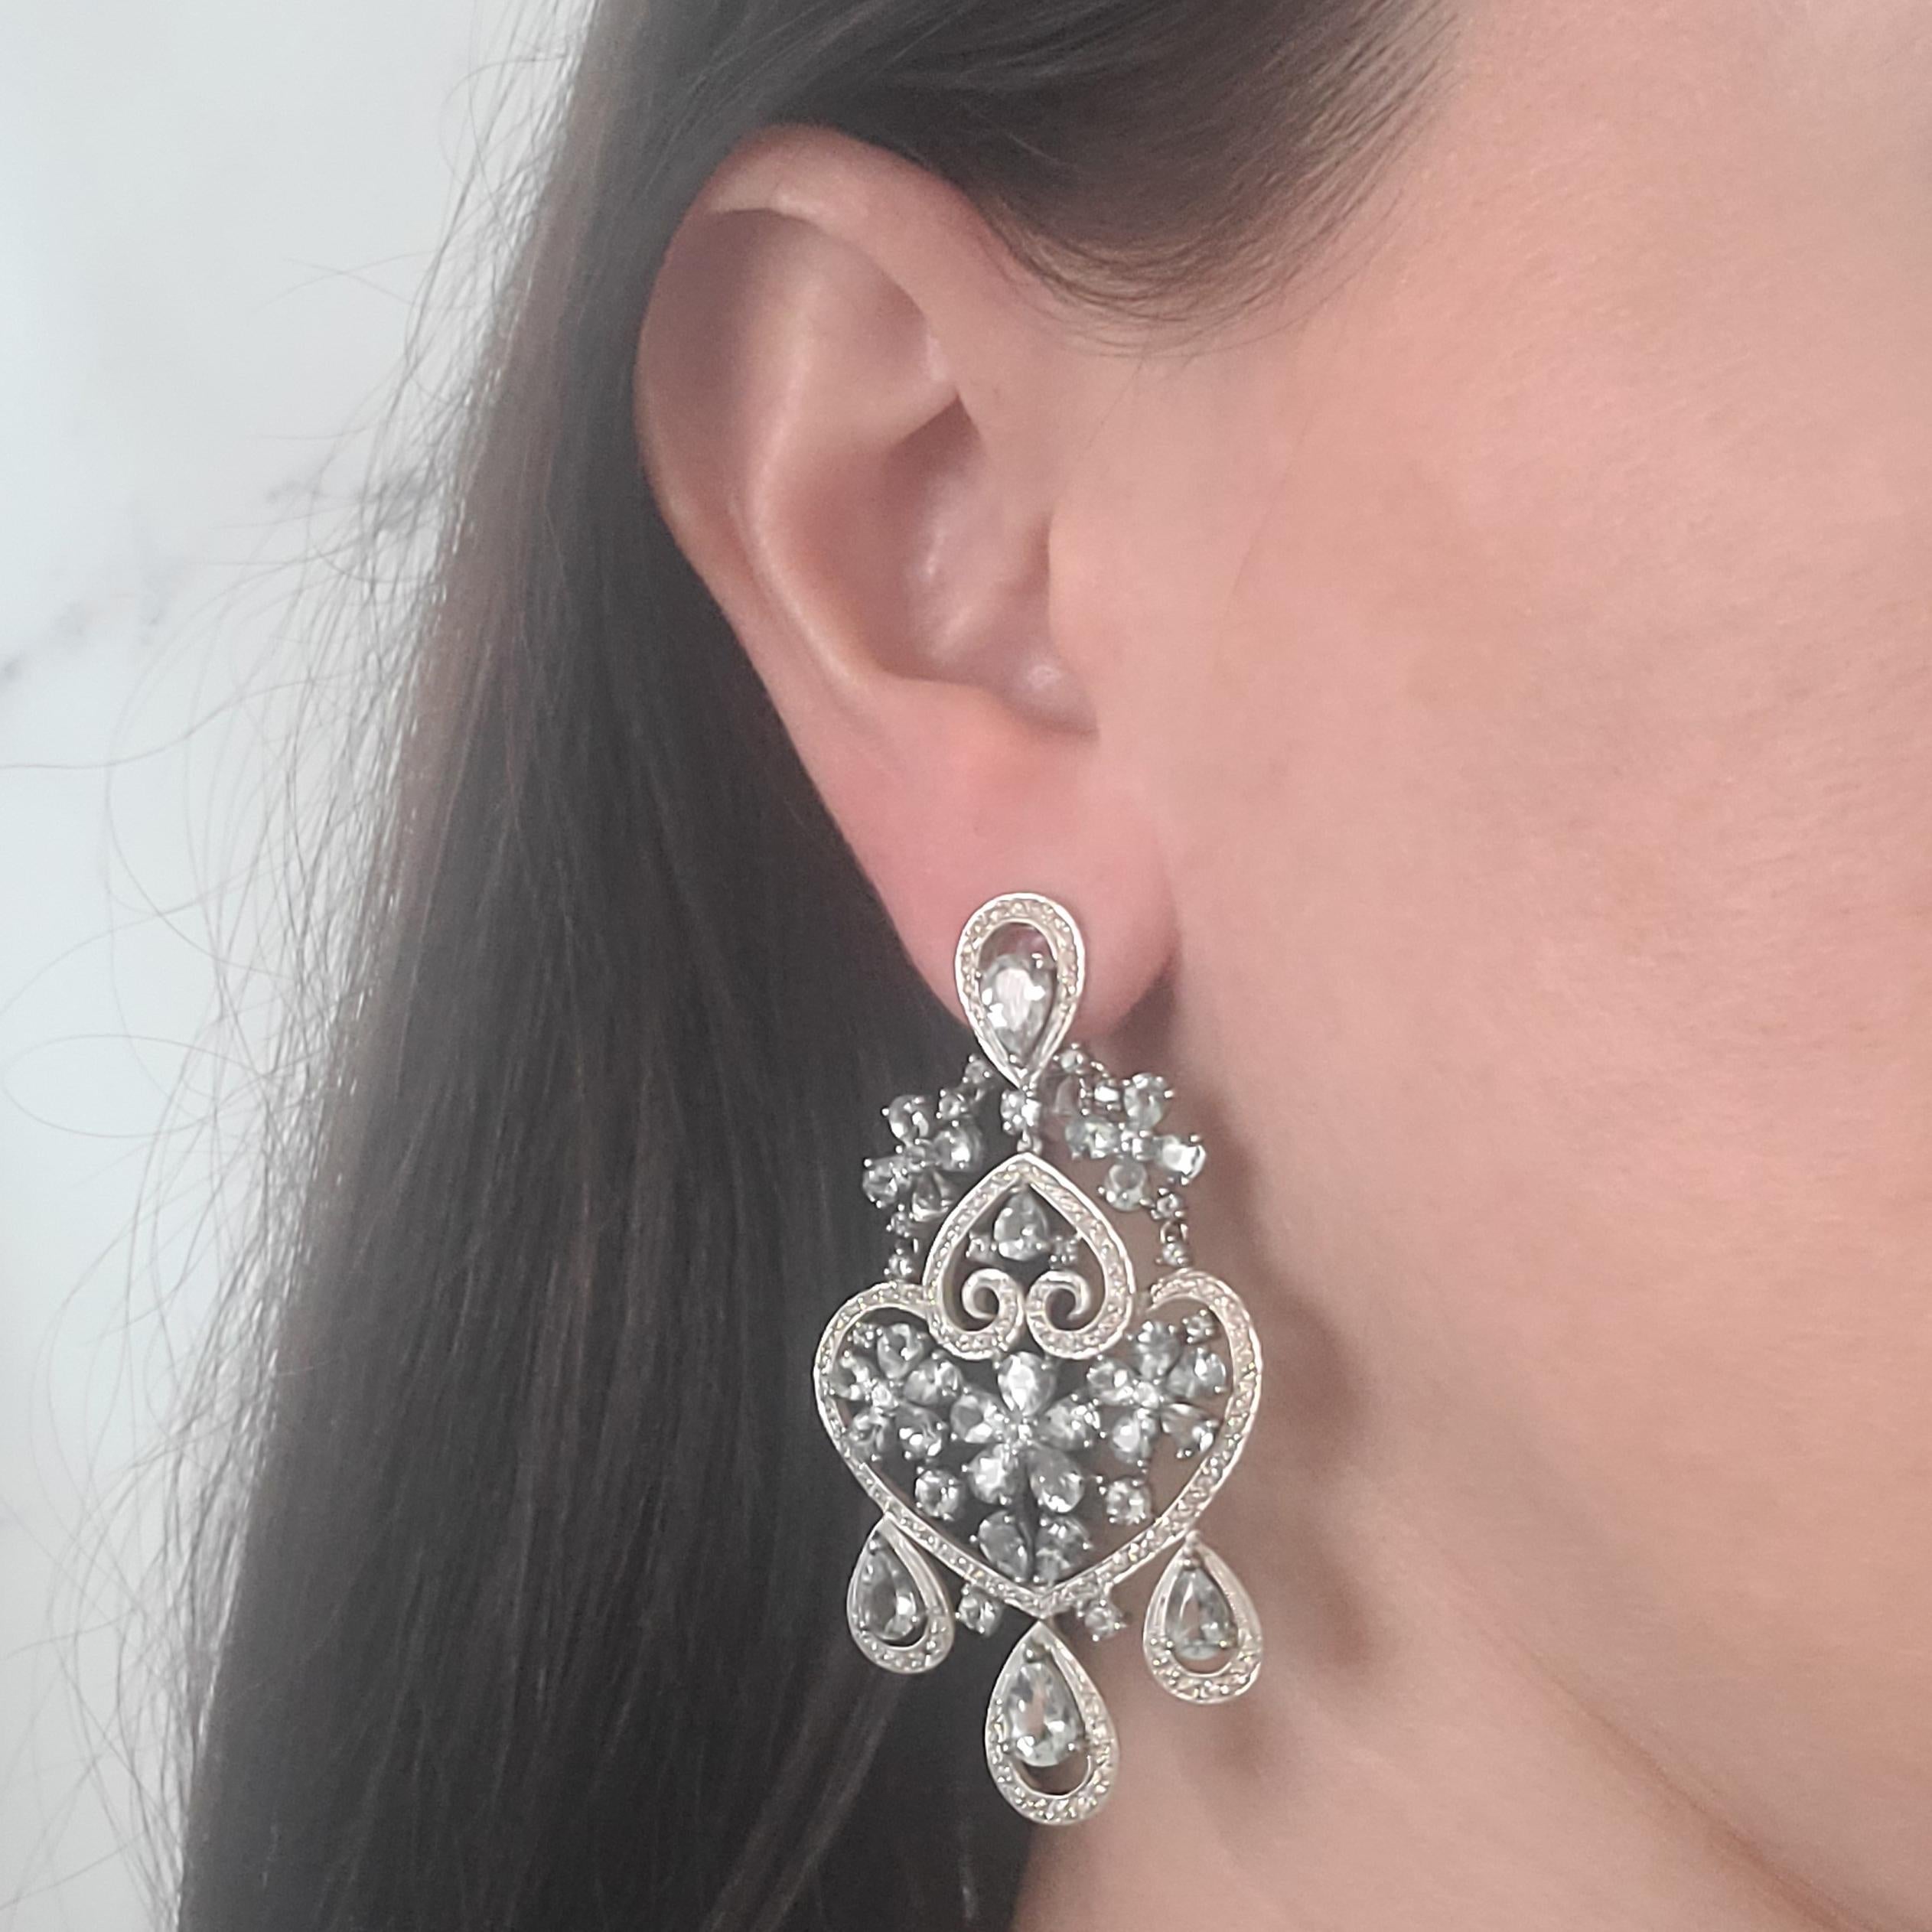 18 Karat White Gold Chandelier Earrings Featuring 64 Pear & Round Cut Aquamarines Totaling Approximately 10 Carats Accented By 230 Round Diamonds Of VS Clarity & G Color Totaling 2.30 Carats. Omega Clip Back With Hinged Post. 2.5 Inches Long.